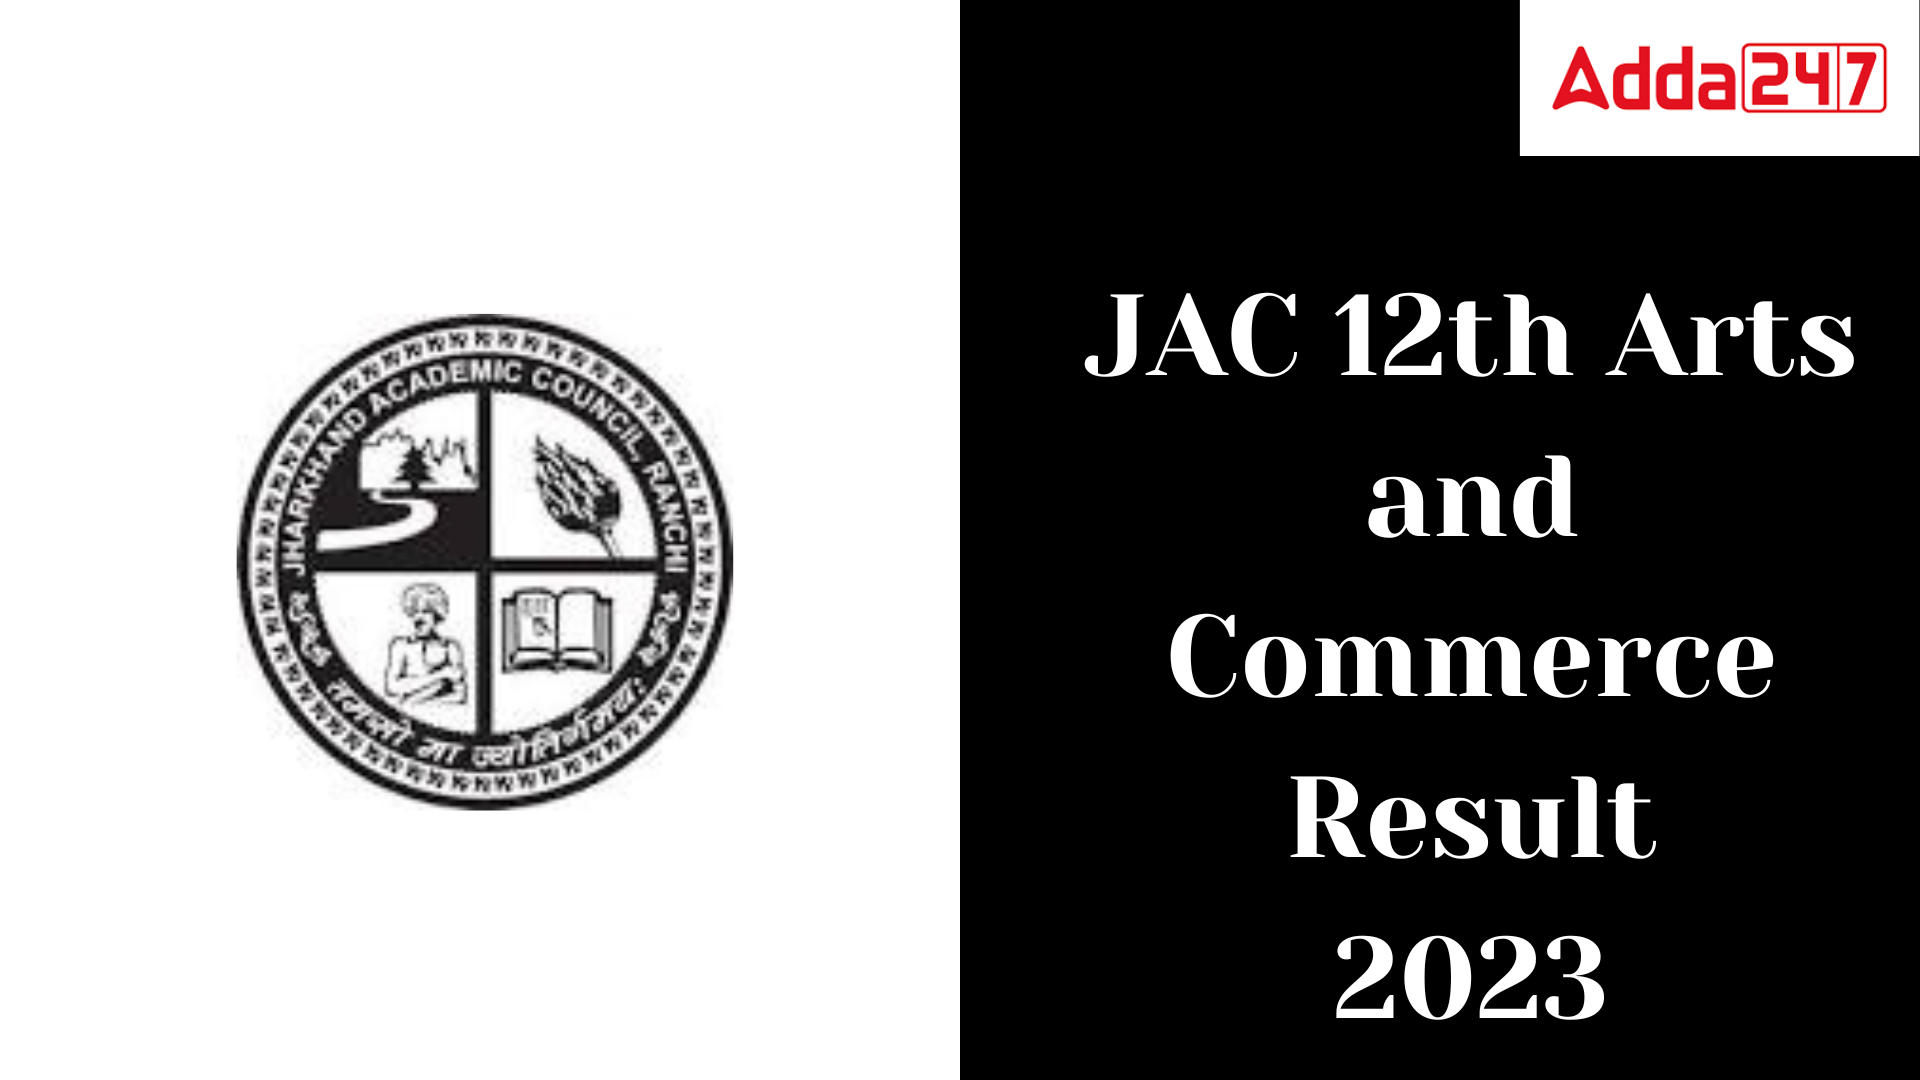 JAC 12th Arts and Commerce Result 2023